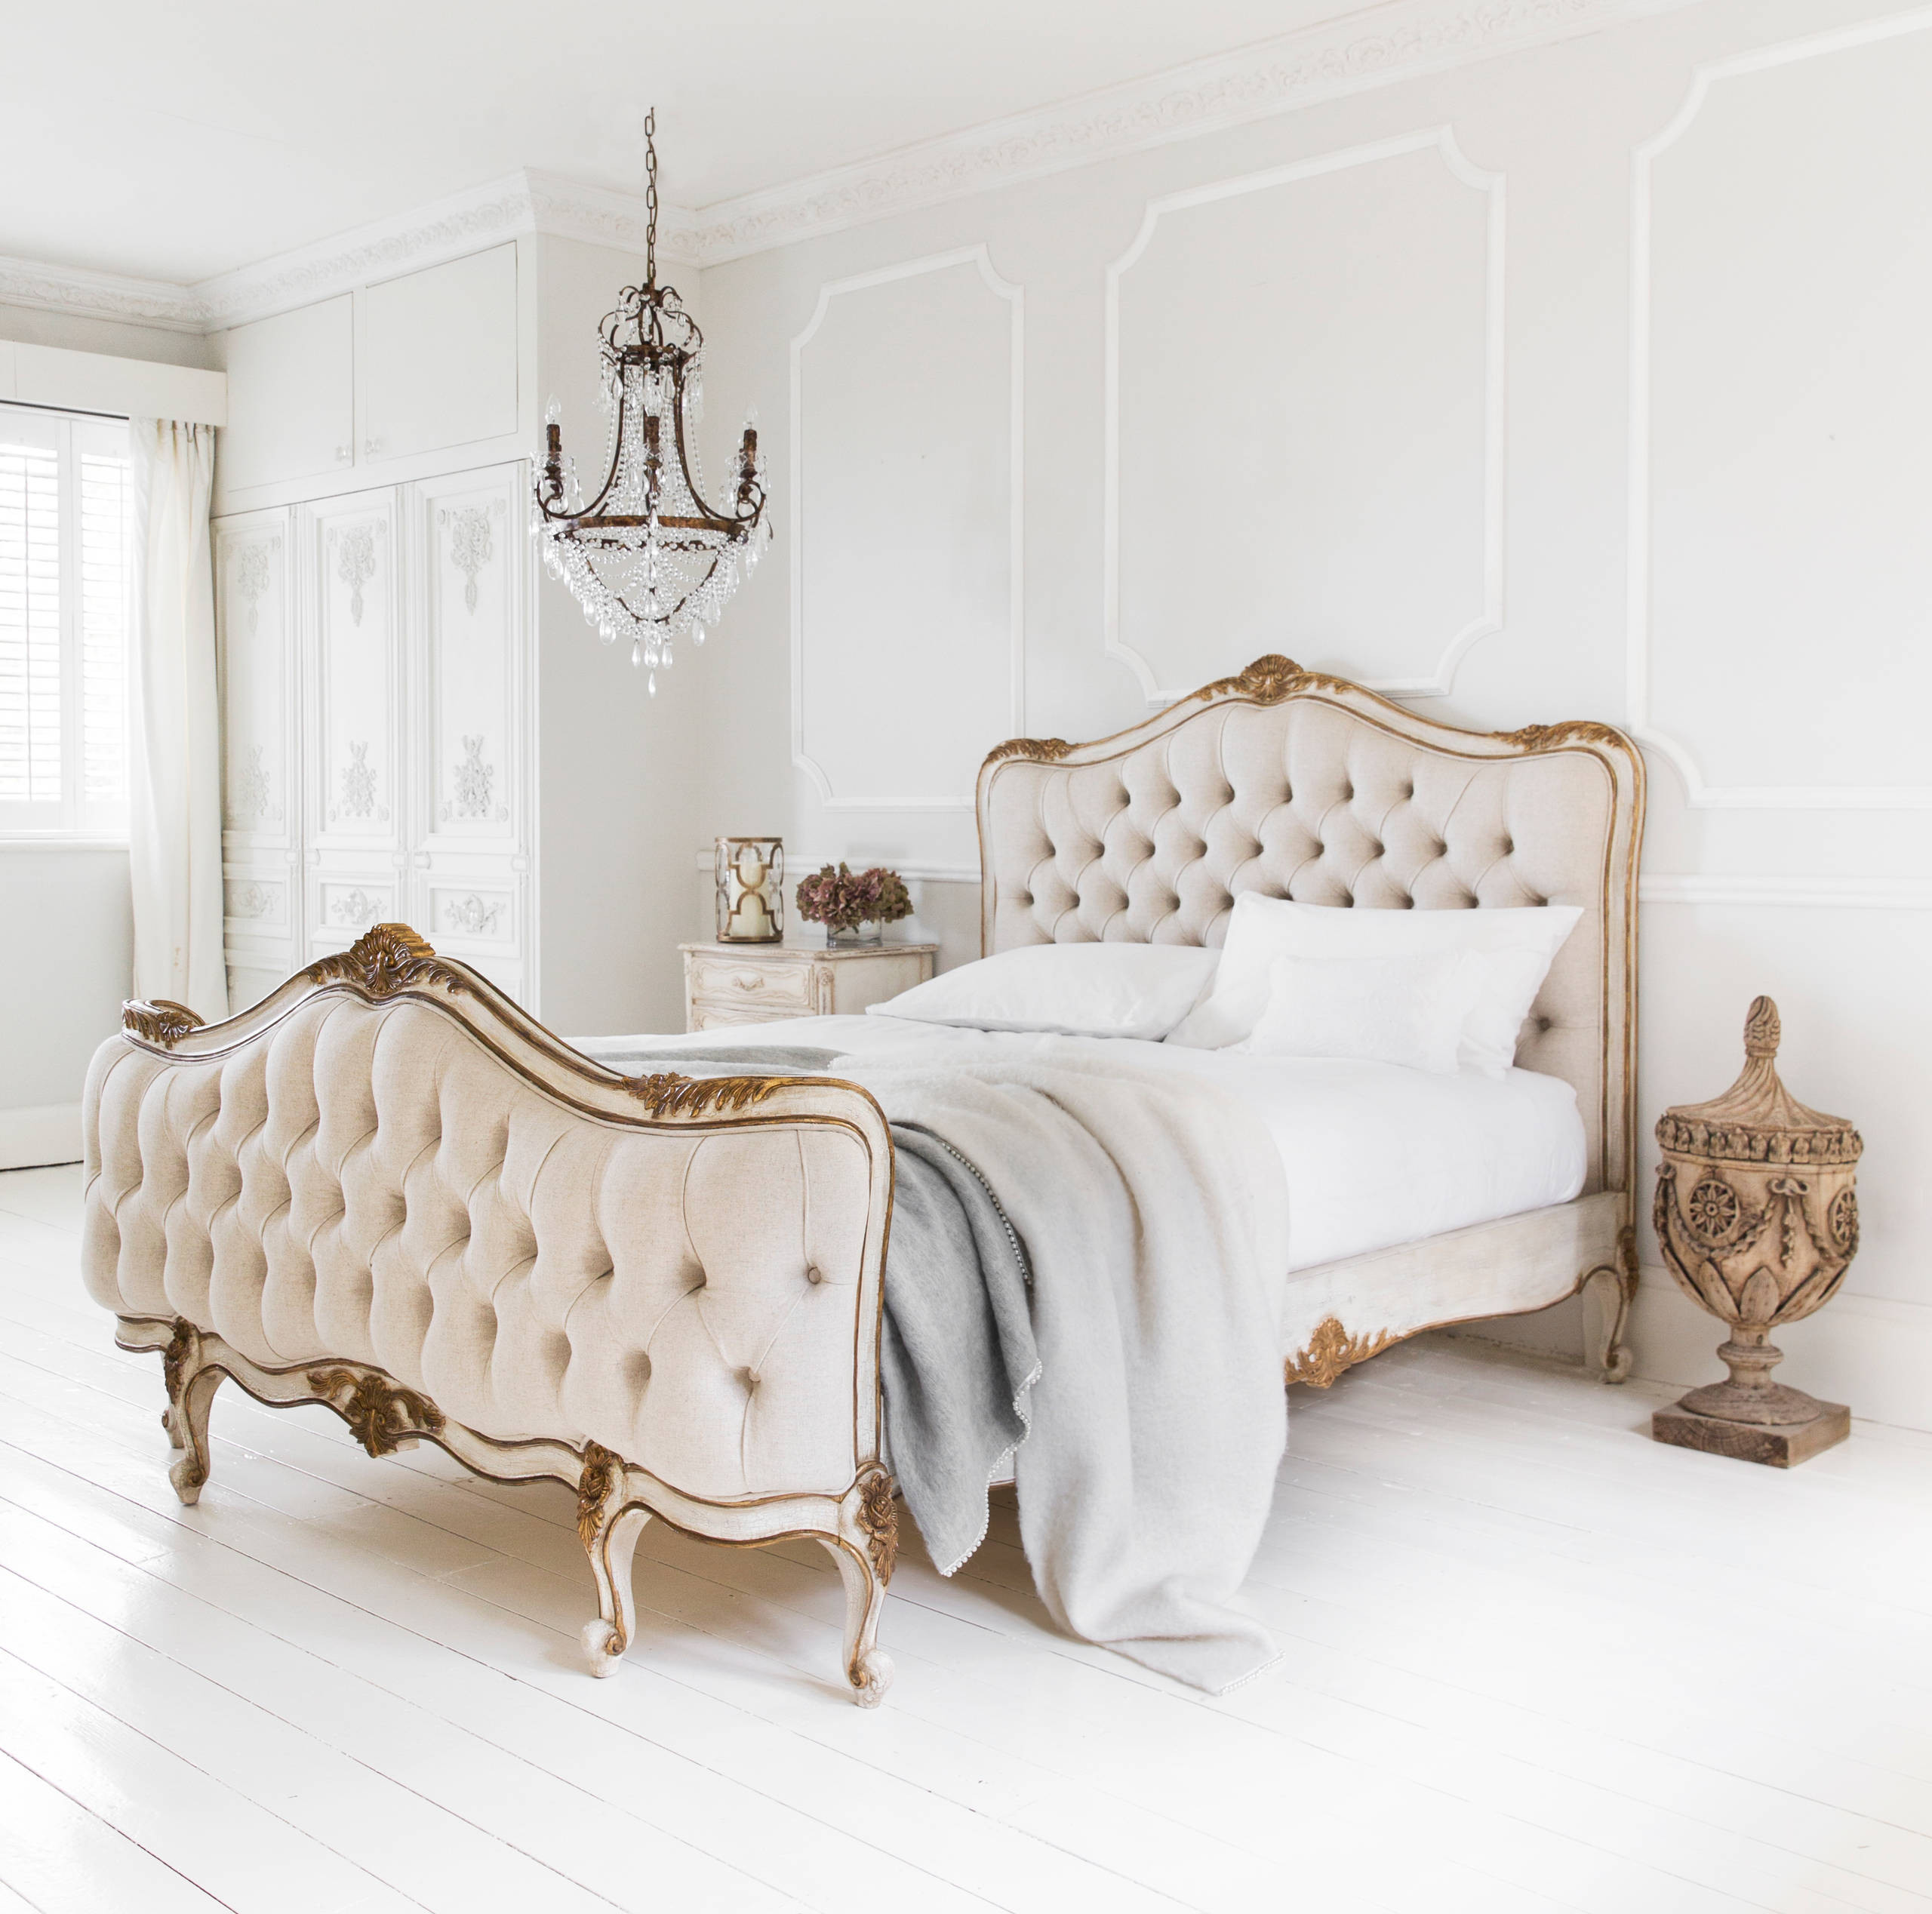 French Bedroom Decor
 3 Secrets To French Decorating Versailles Inspired Rooms